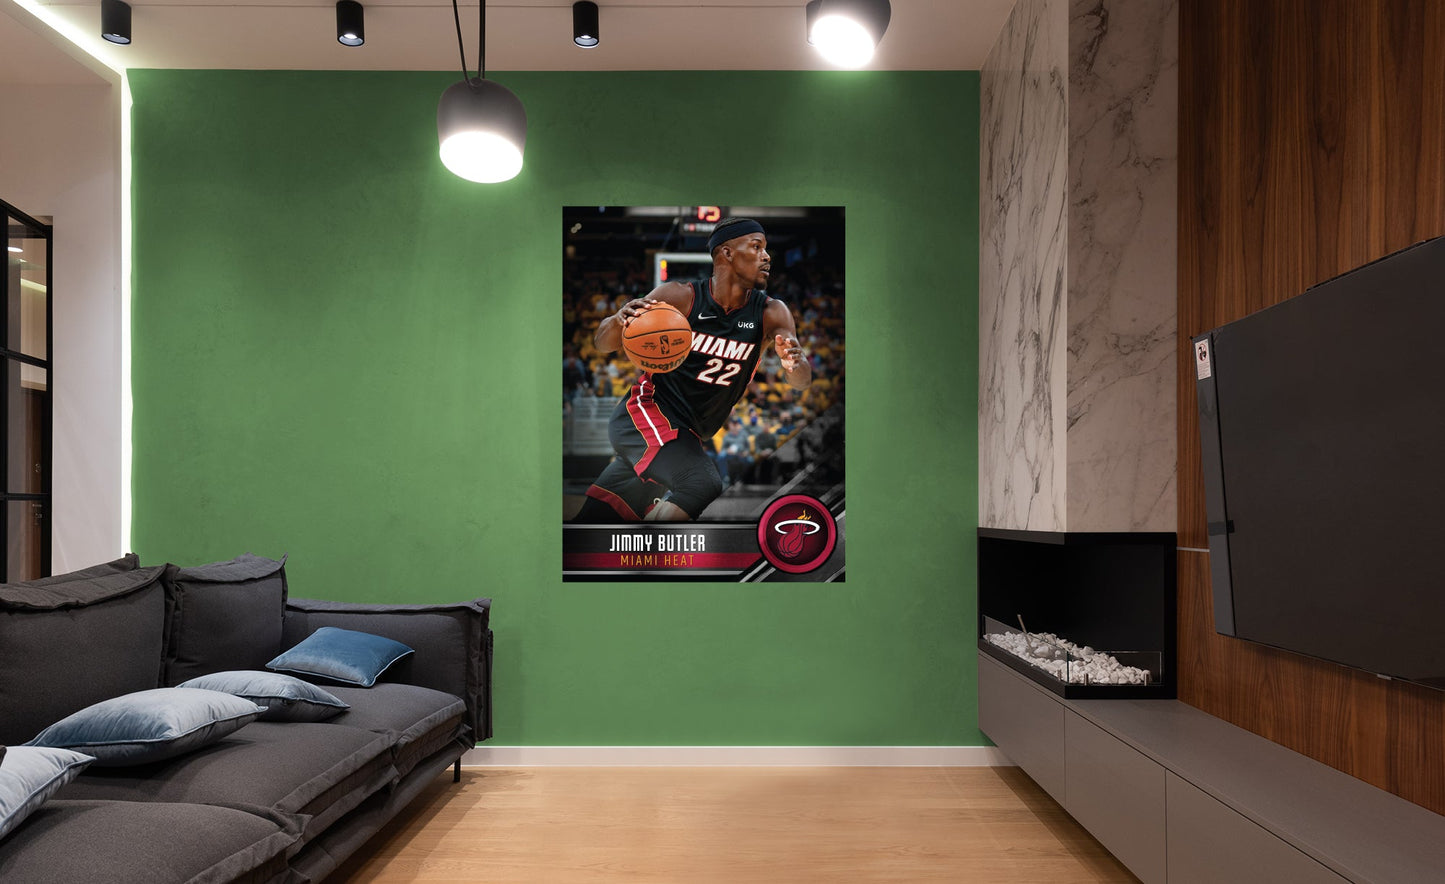 Miami Heat: Jimmy Butler Poster - Officially Licensed NBA Removable Adhesive Decal